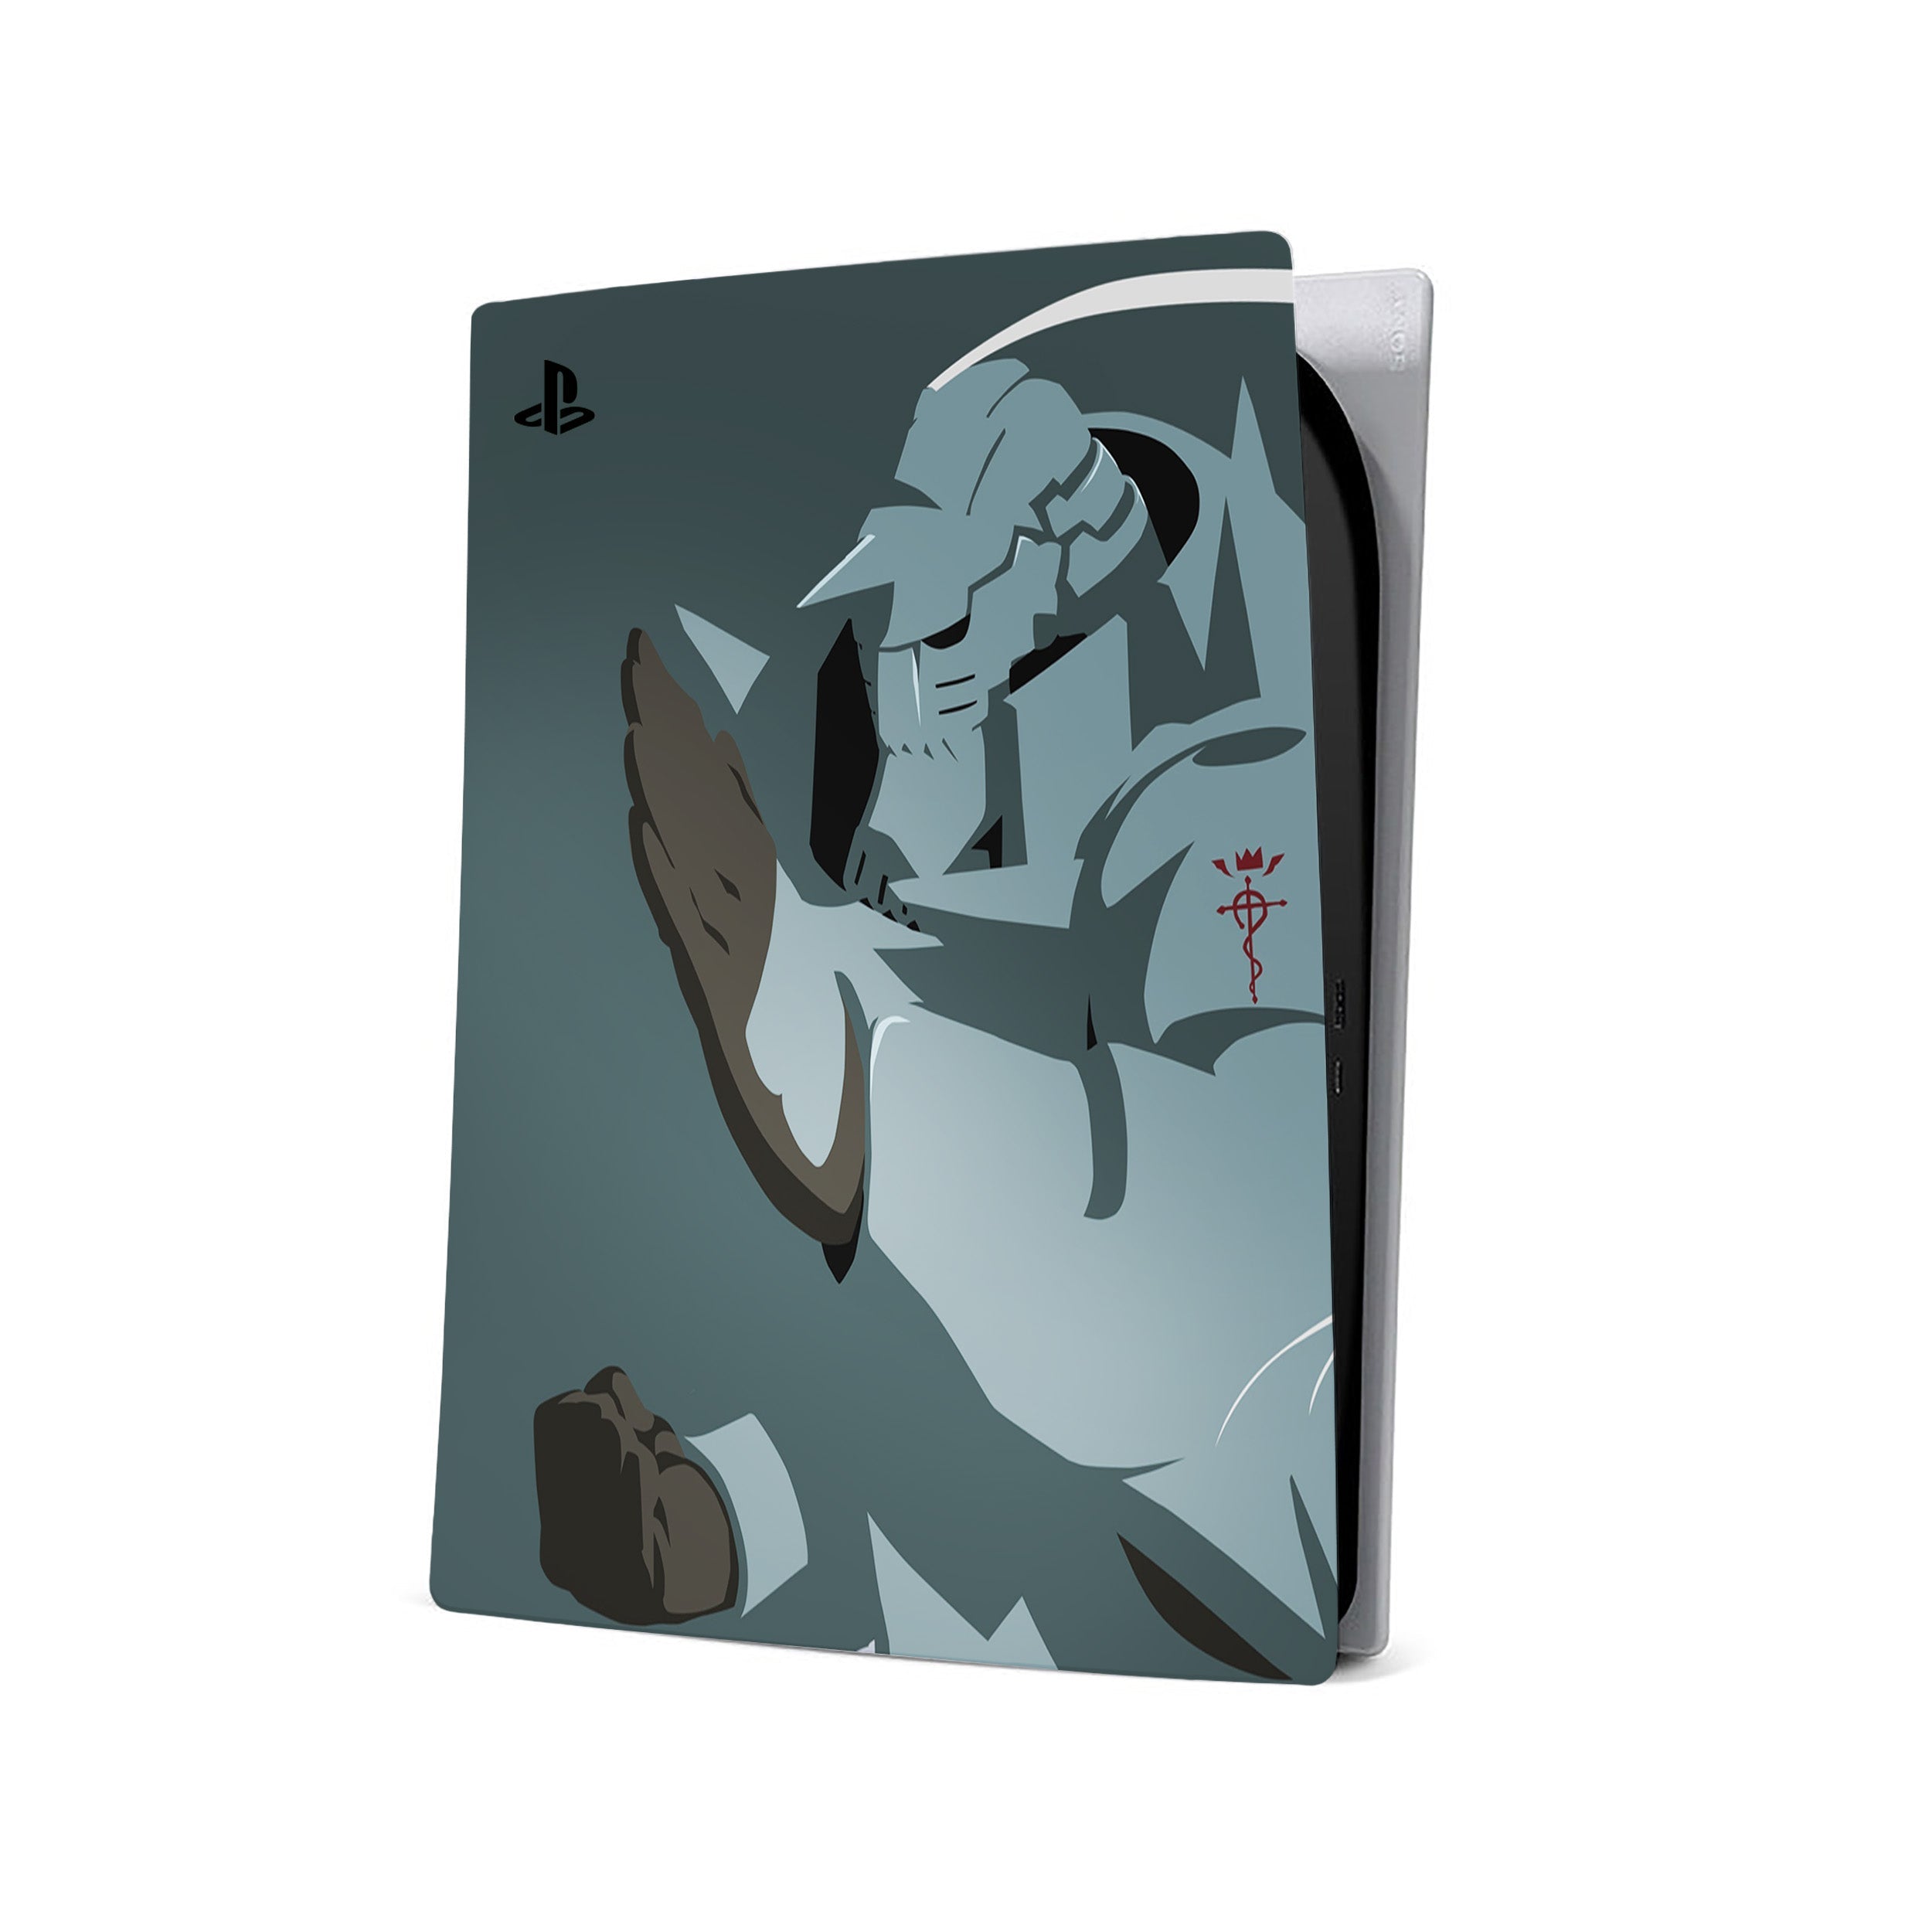 A video game skin featuring a Fullmetal Alchemist Alphonse Elric design for the PS5.